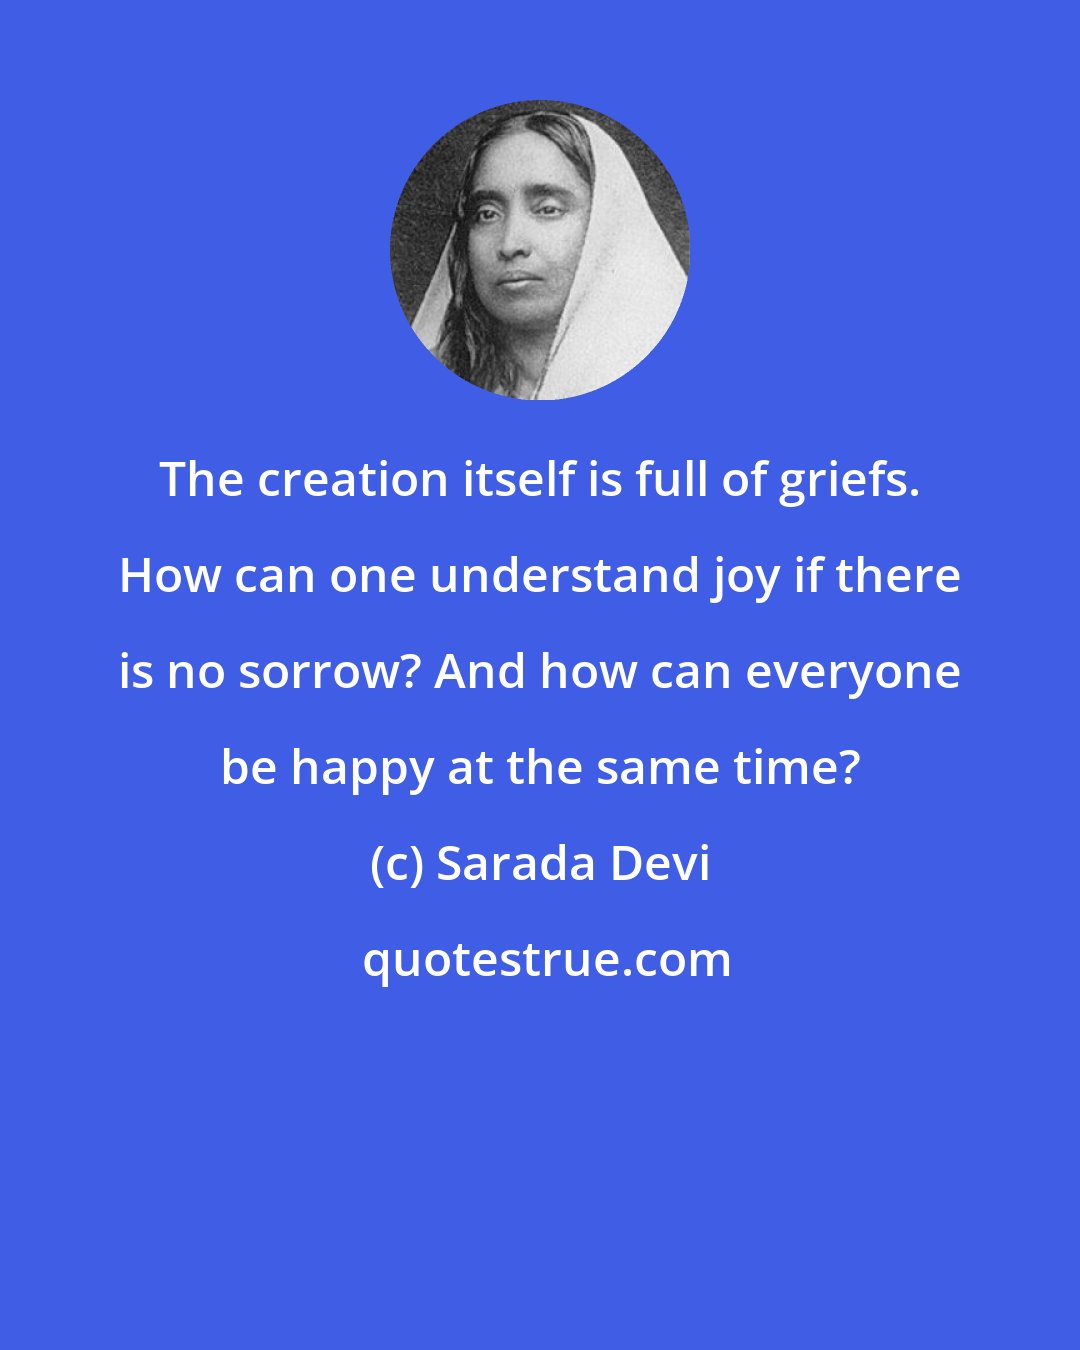 Sarada Devi: The creation itself is full of griefs. How can one understand joy if there is no sorrow? And how can everyone be happy at the same time?